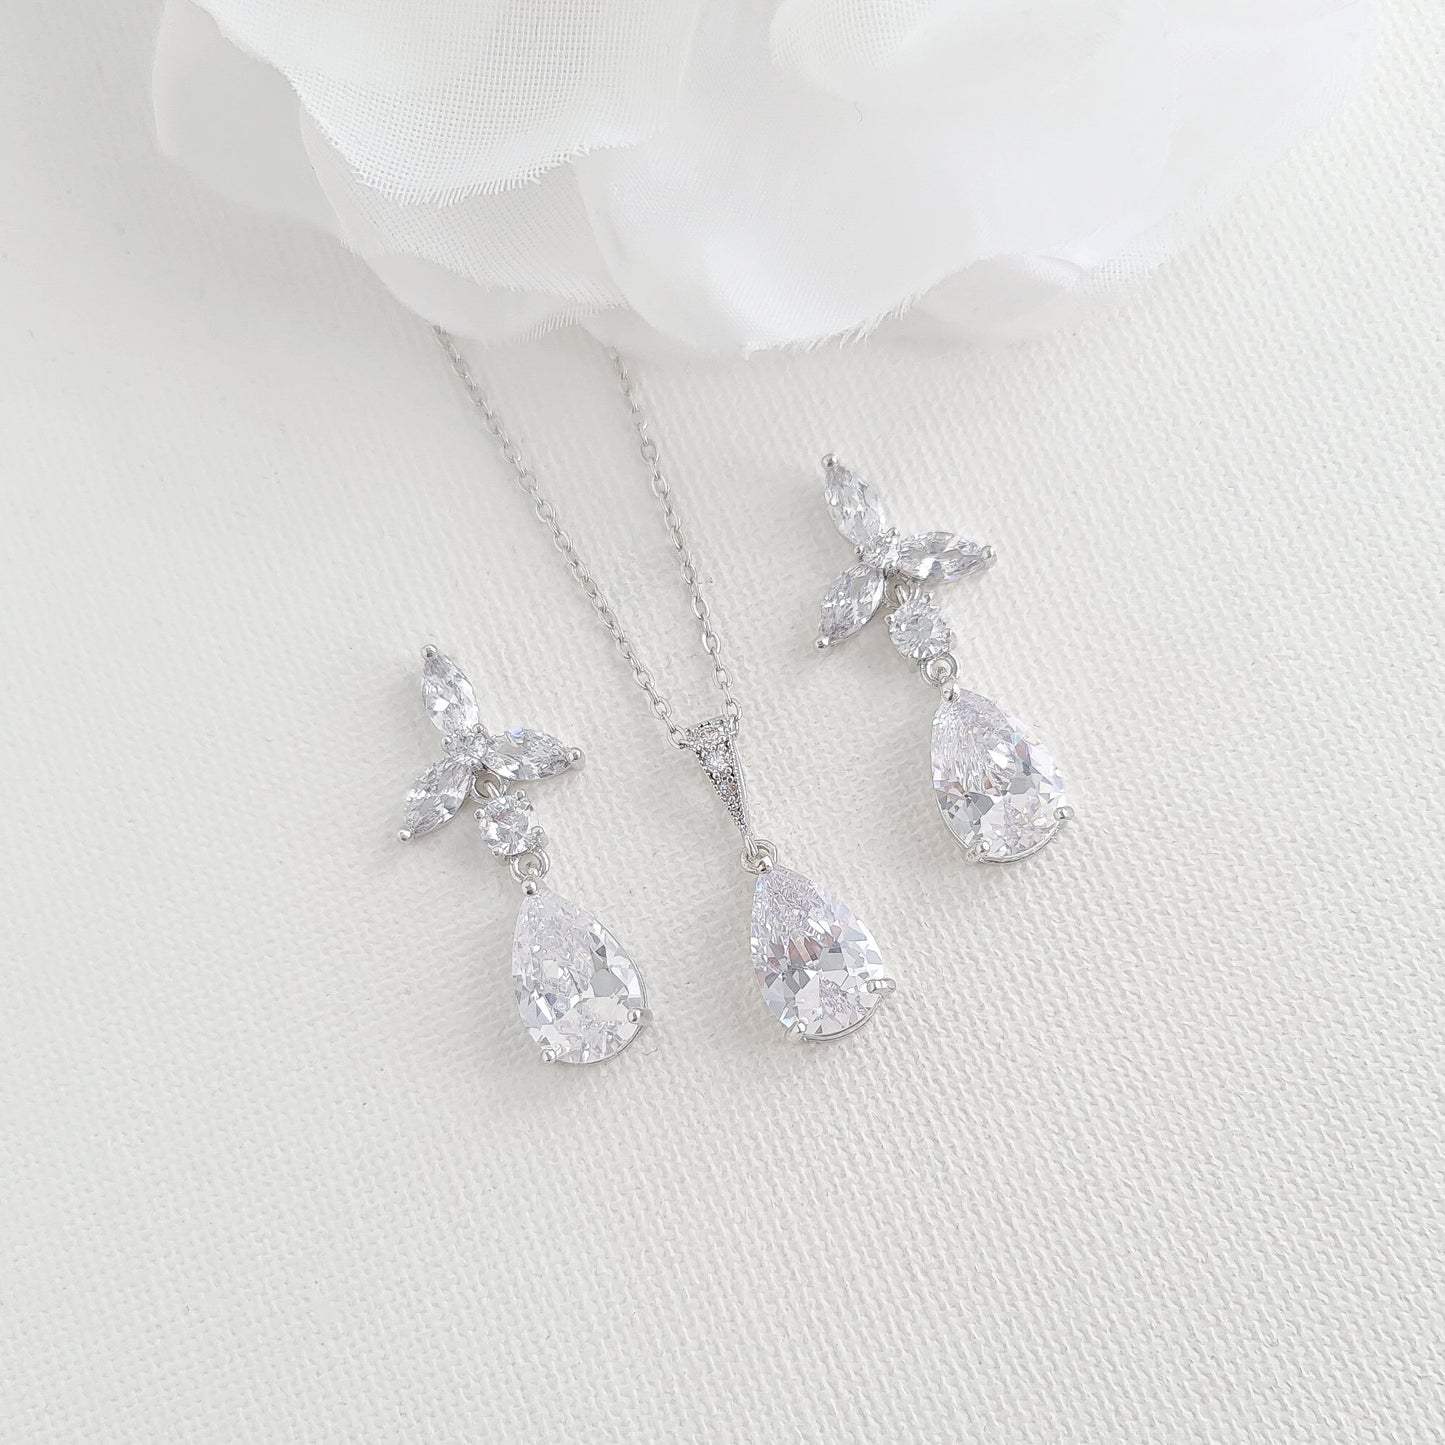 Floral Earrings with Necklace for Bridesmaids Jewelry Gift Set-Flora